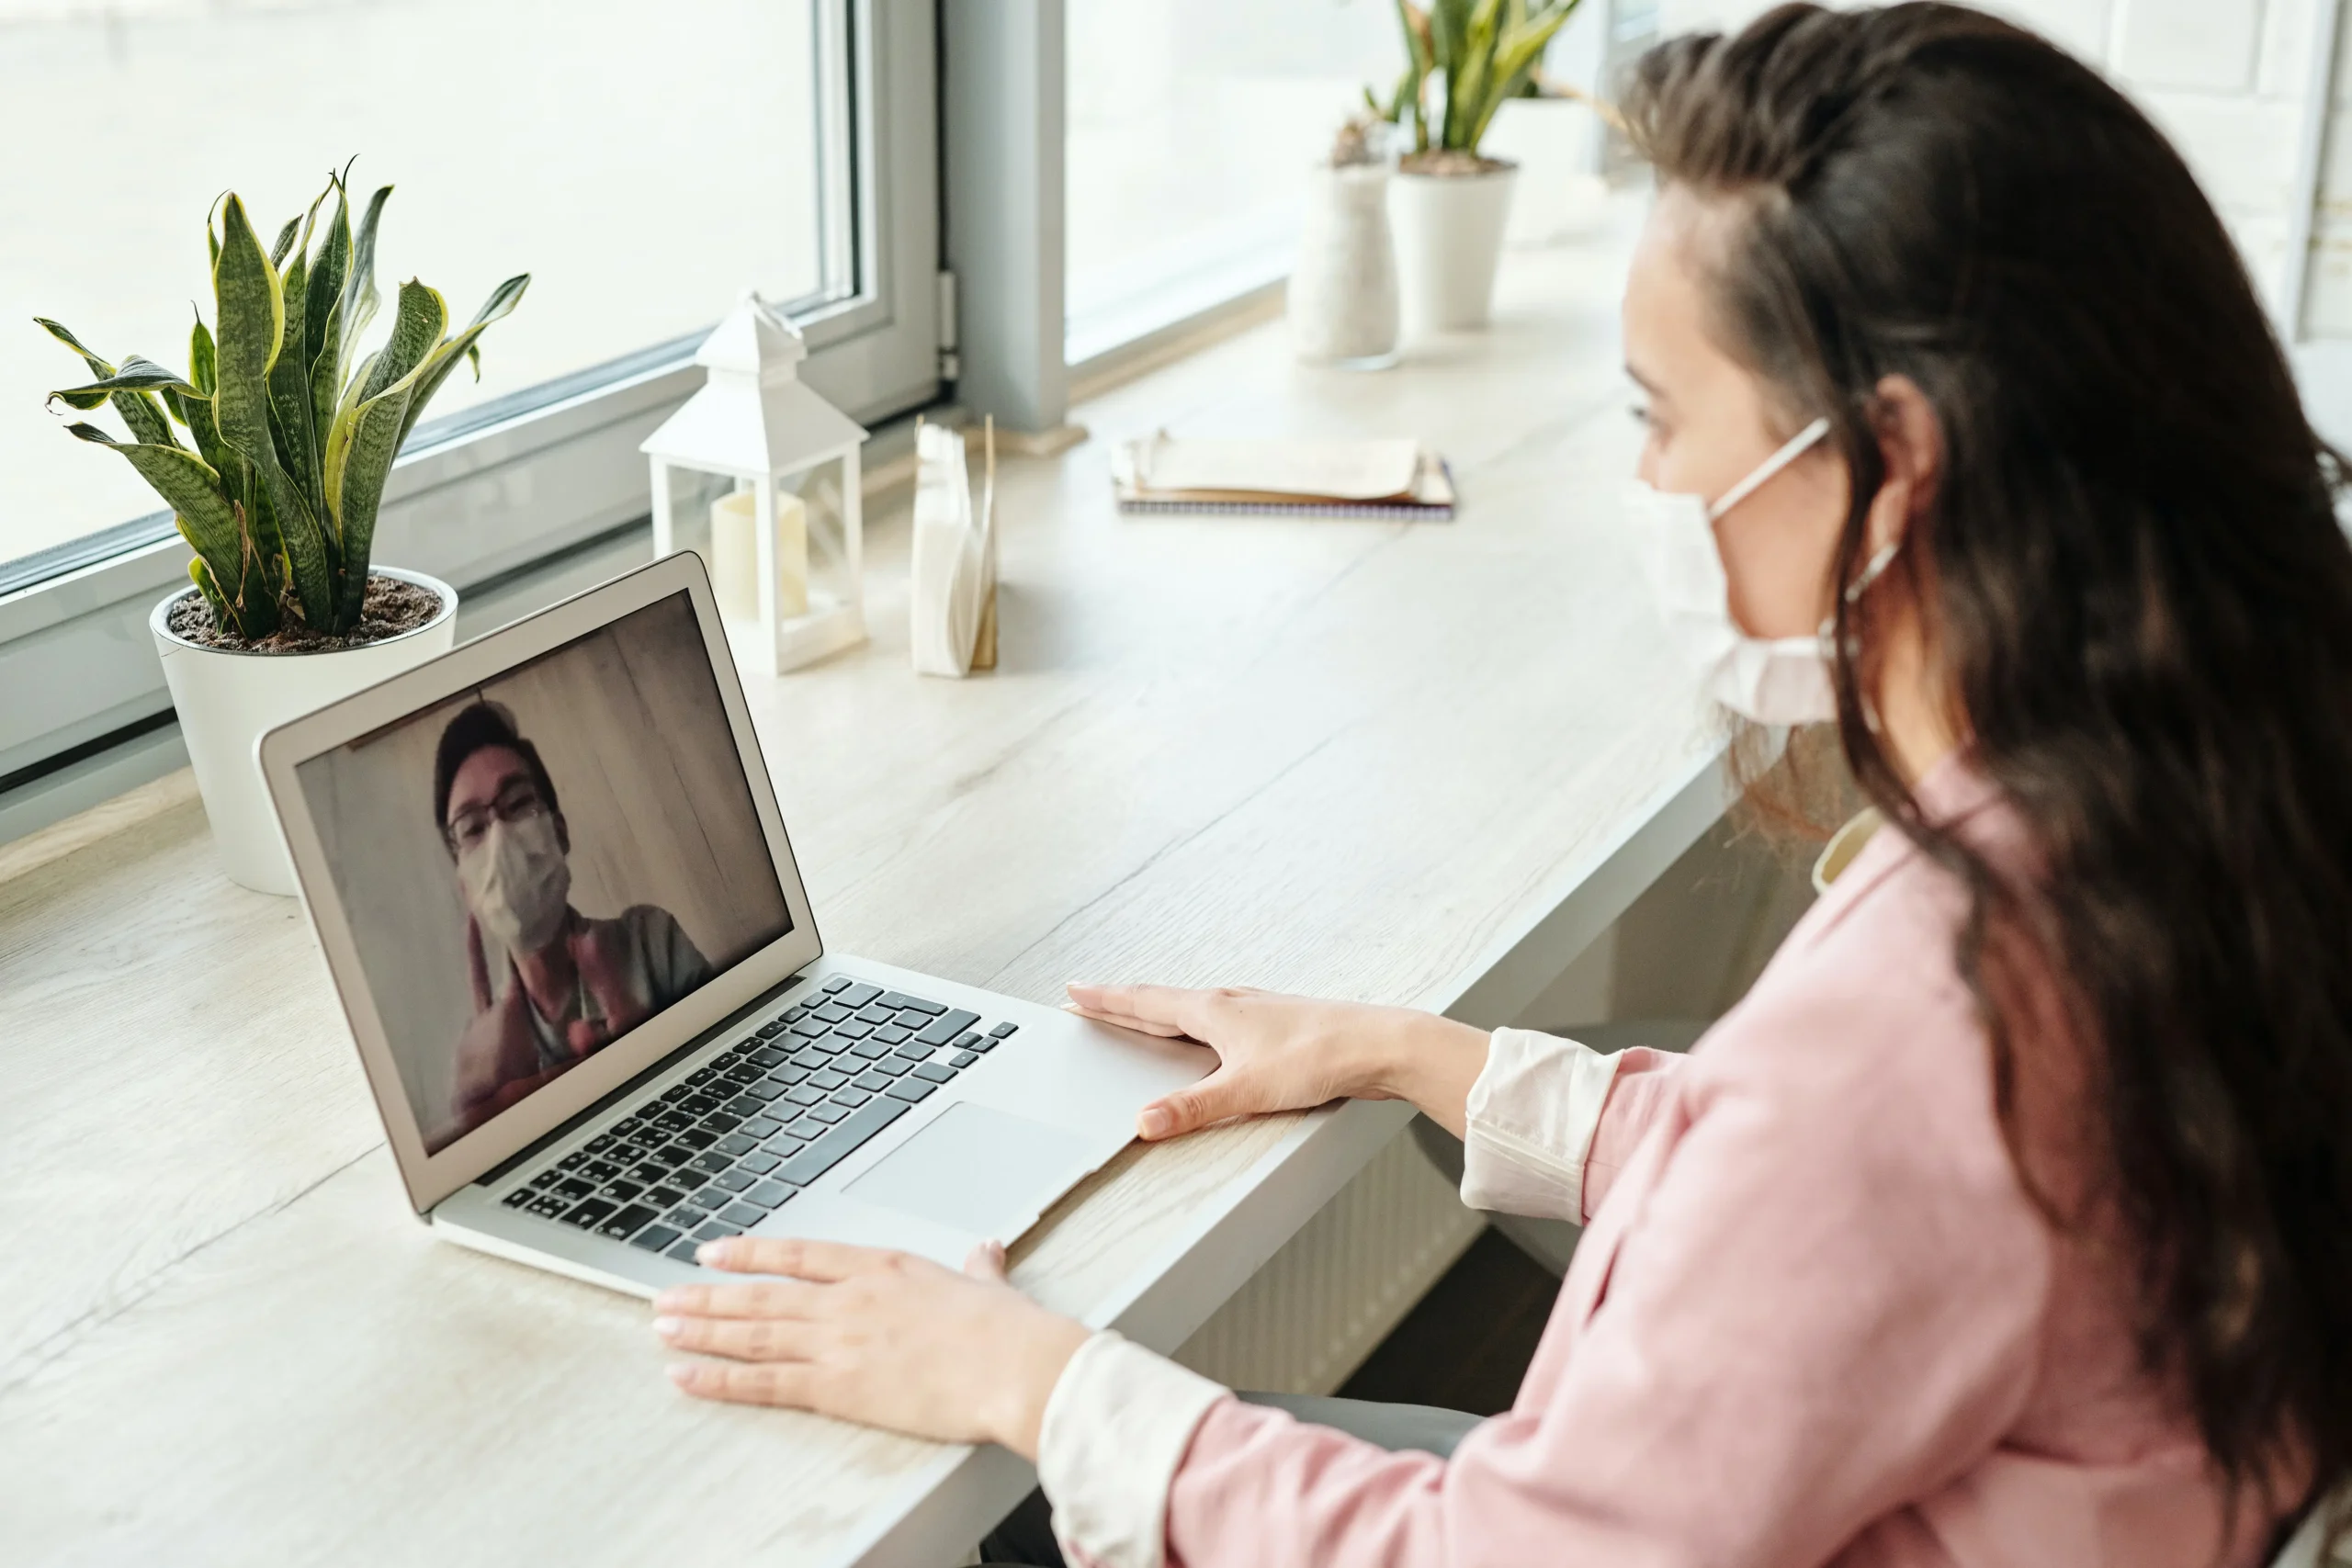 A woman is using a laptop to make a video call and learn more about telemedicine.